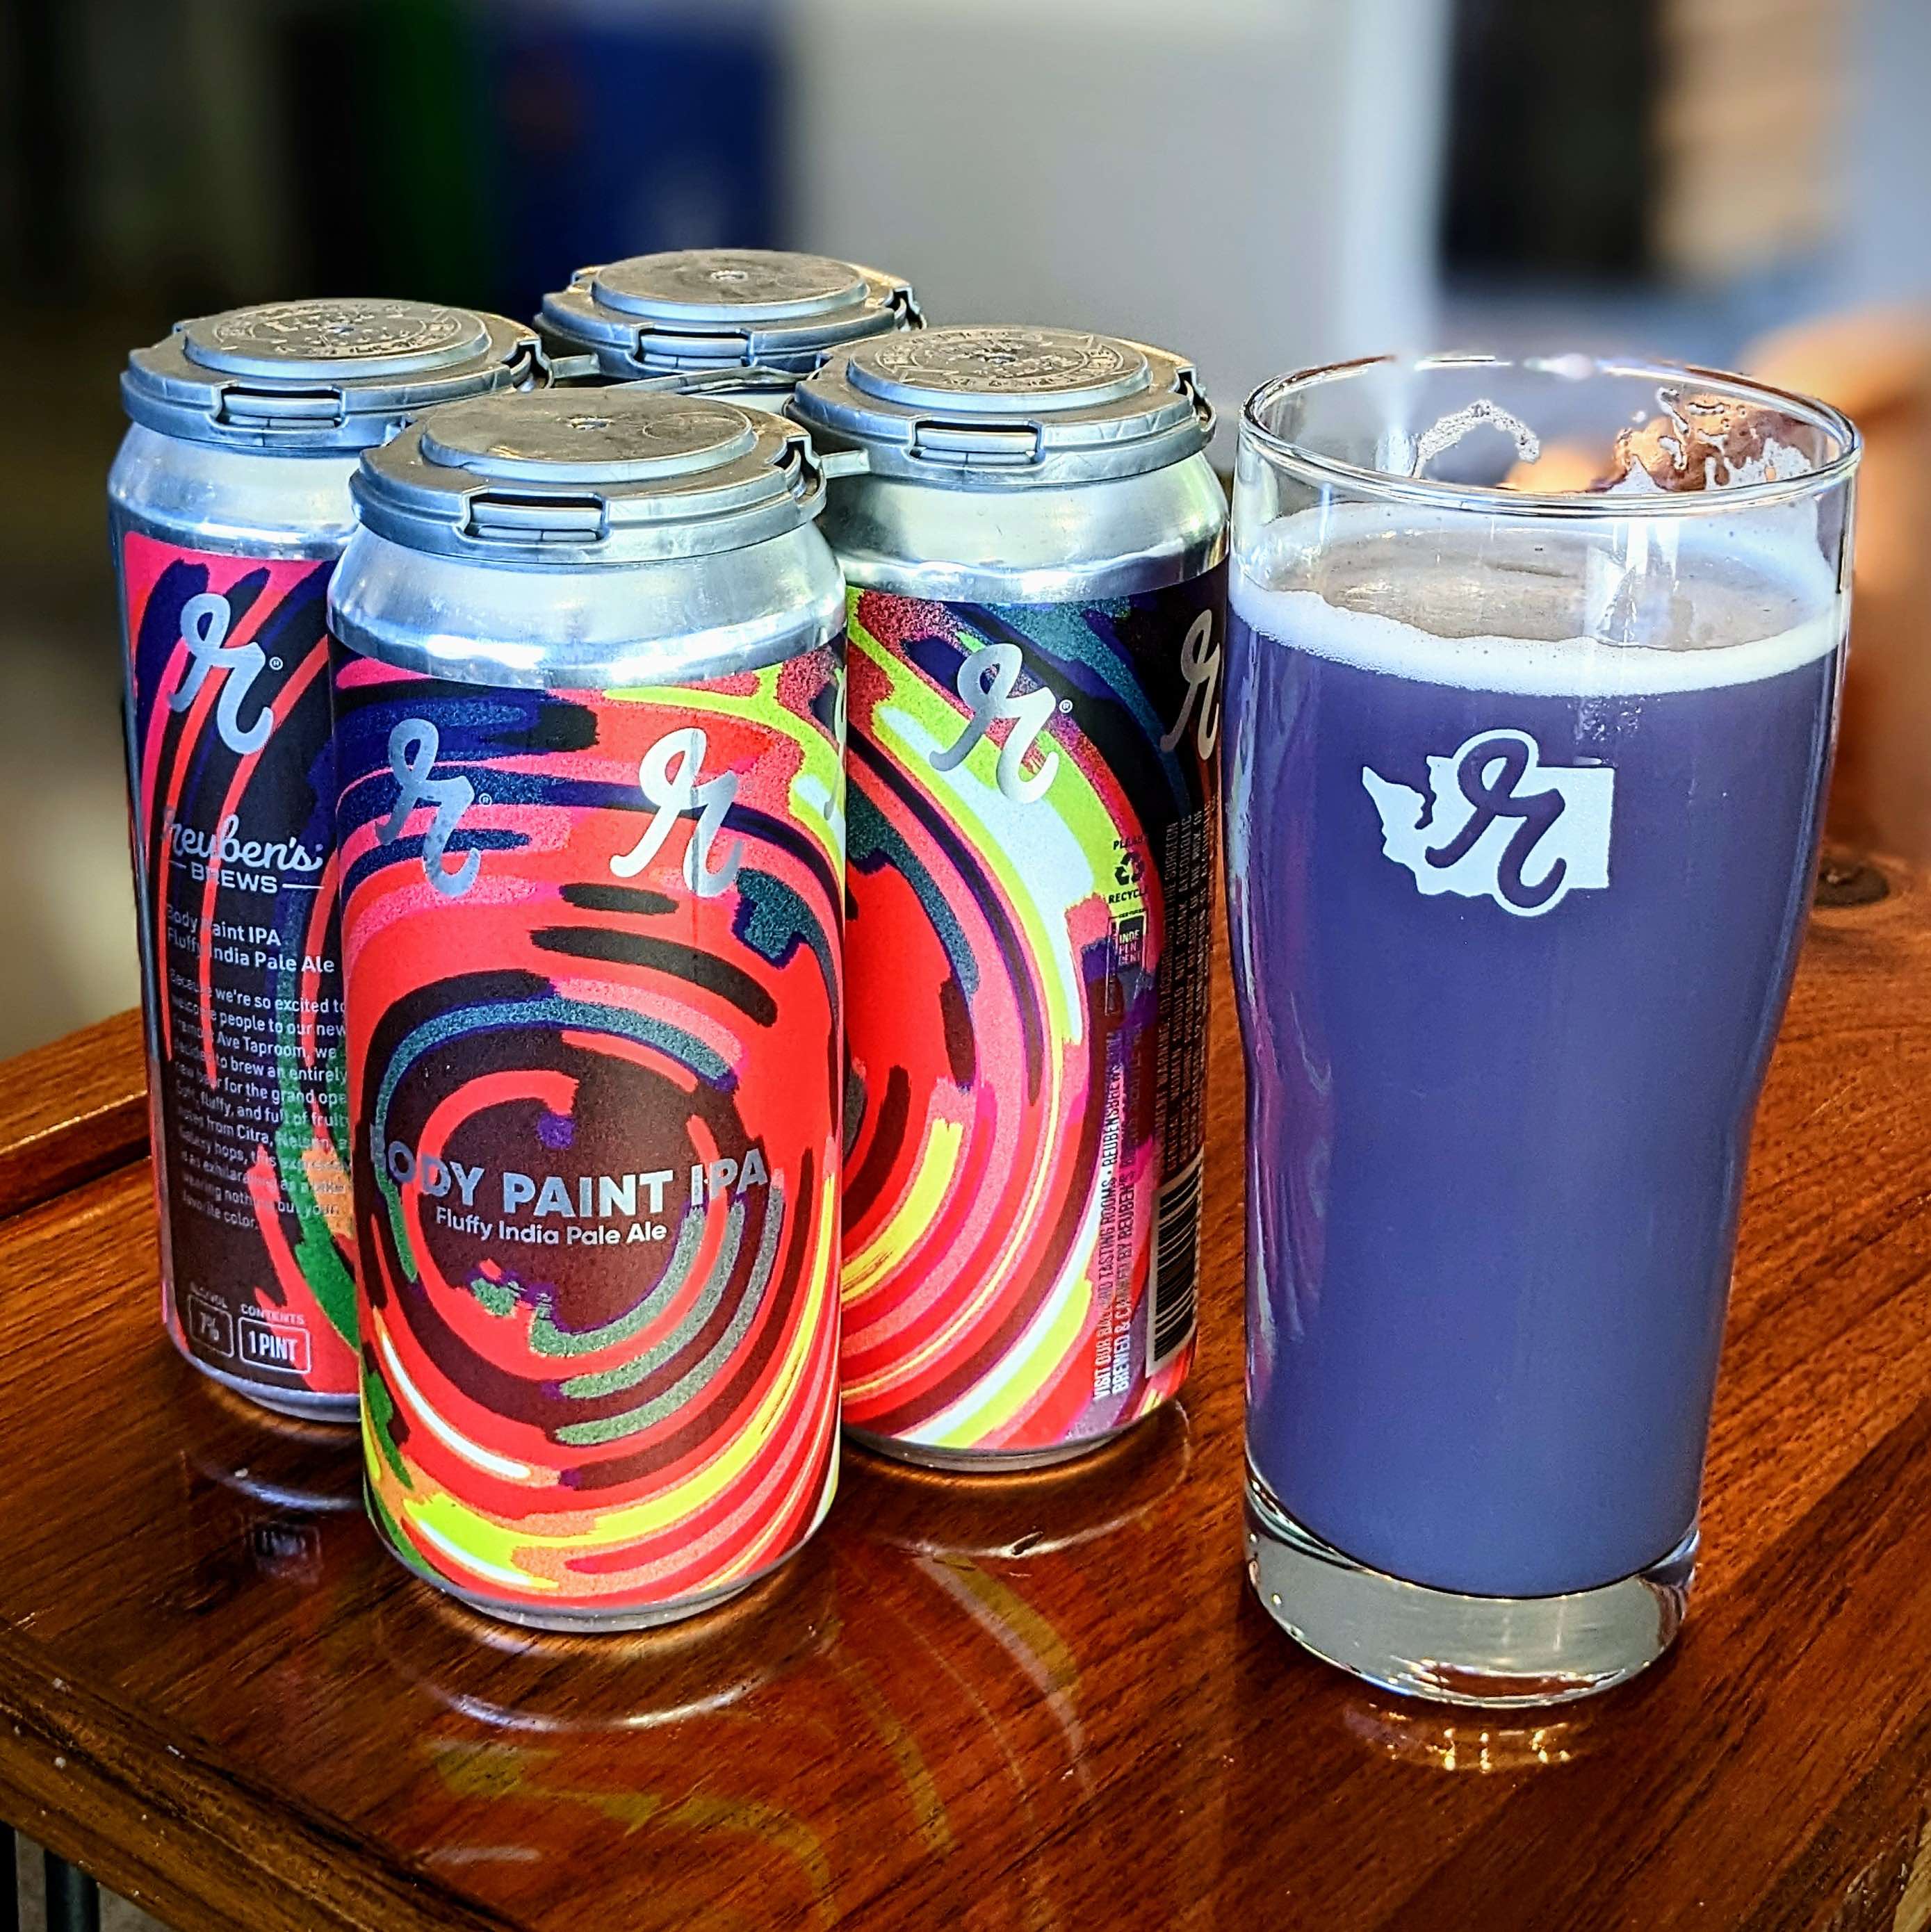 Body Paint, a hazy IPA from Reuben's Brews that's brewed with a splash of color. (image courtesy of Reuben's Brews)